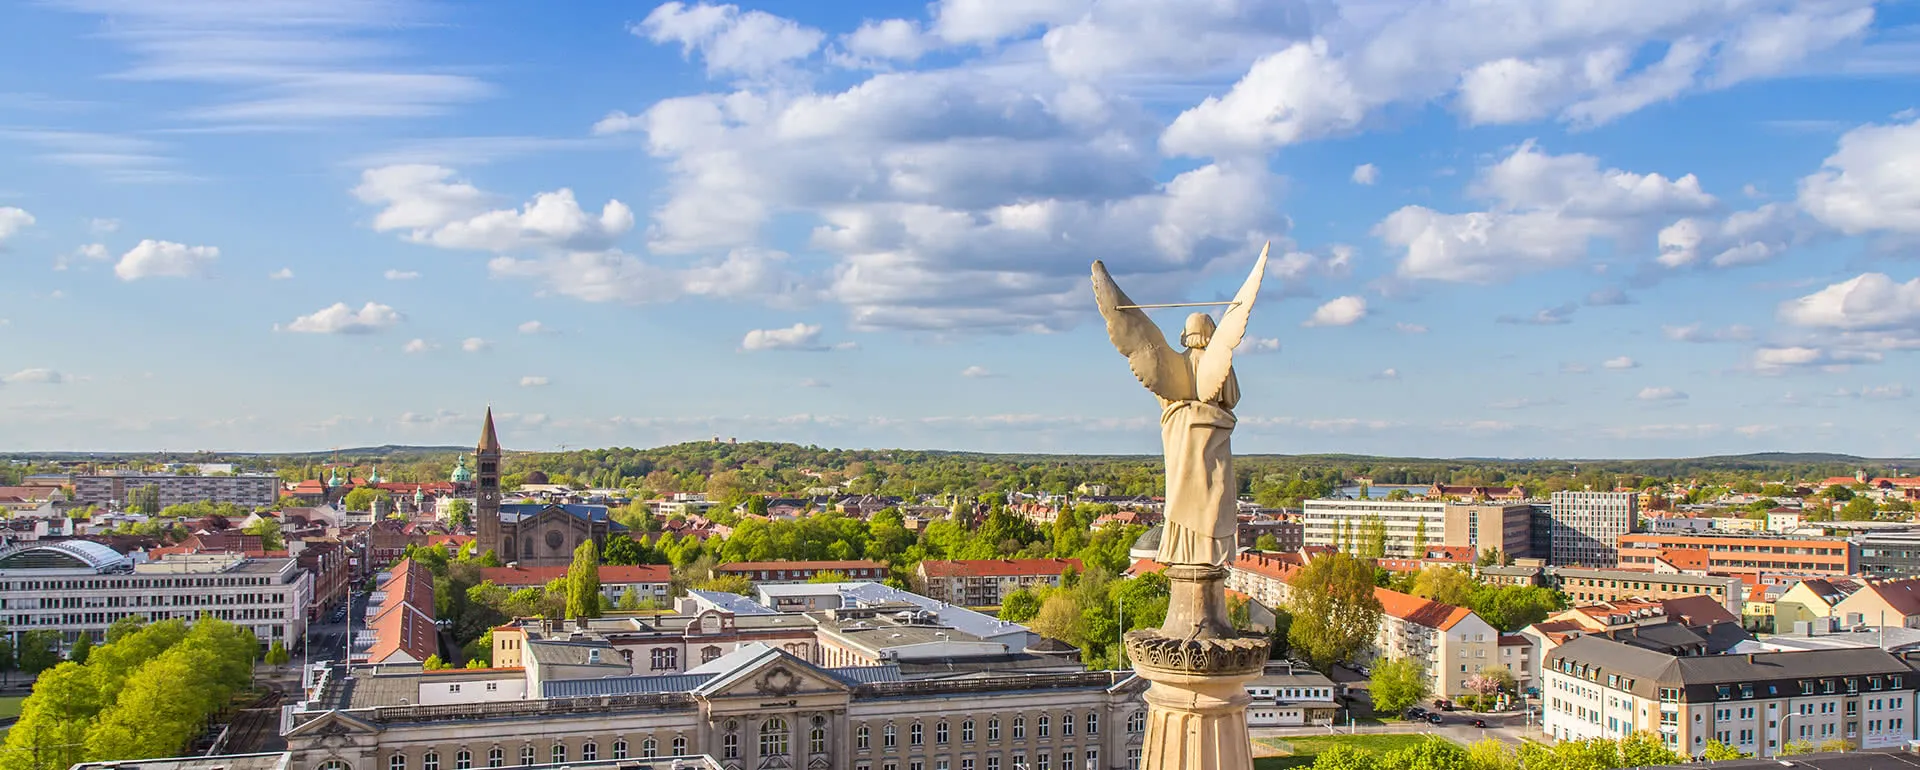 Potsdam - the destination with youth hostels